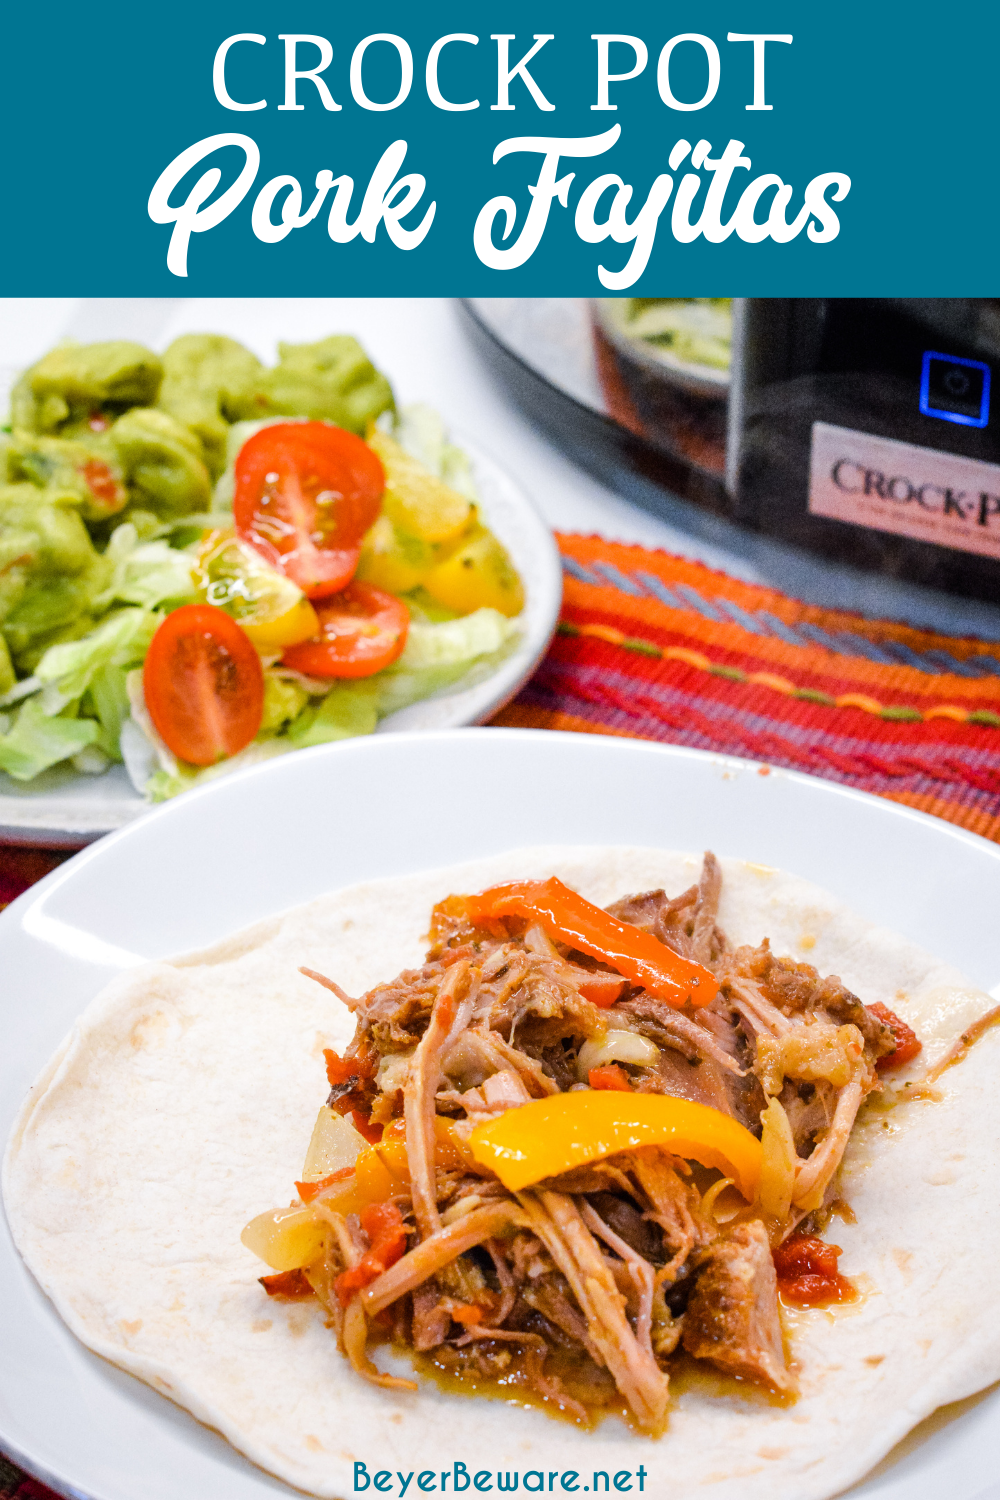 Crock Pot Pork Fajitas recipe is easy to make in a slow cooker along with a pork loin roast, can of Rotel, fajita seasonings, onions and peppers slow cooked all day for an easy weeknight dinner or Taco Tuesday.